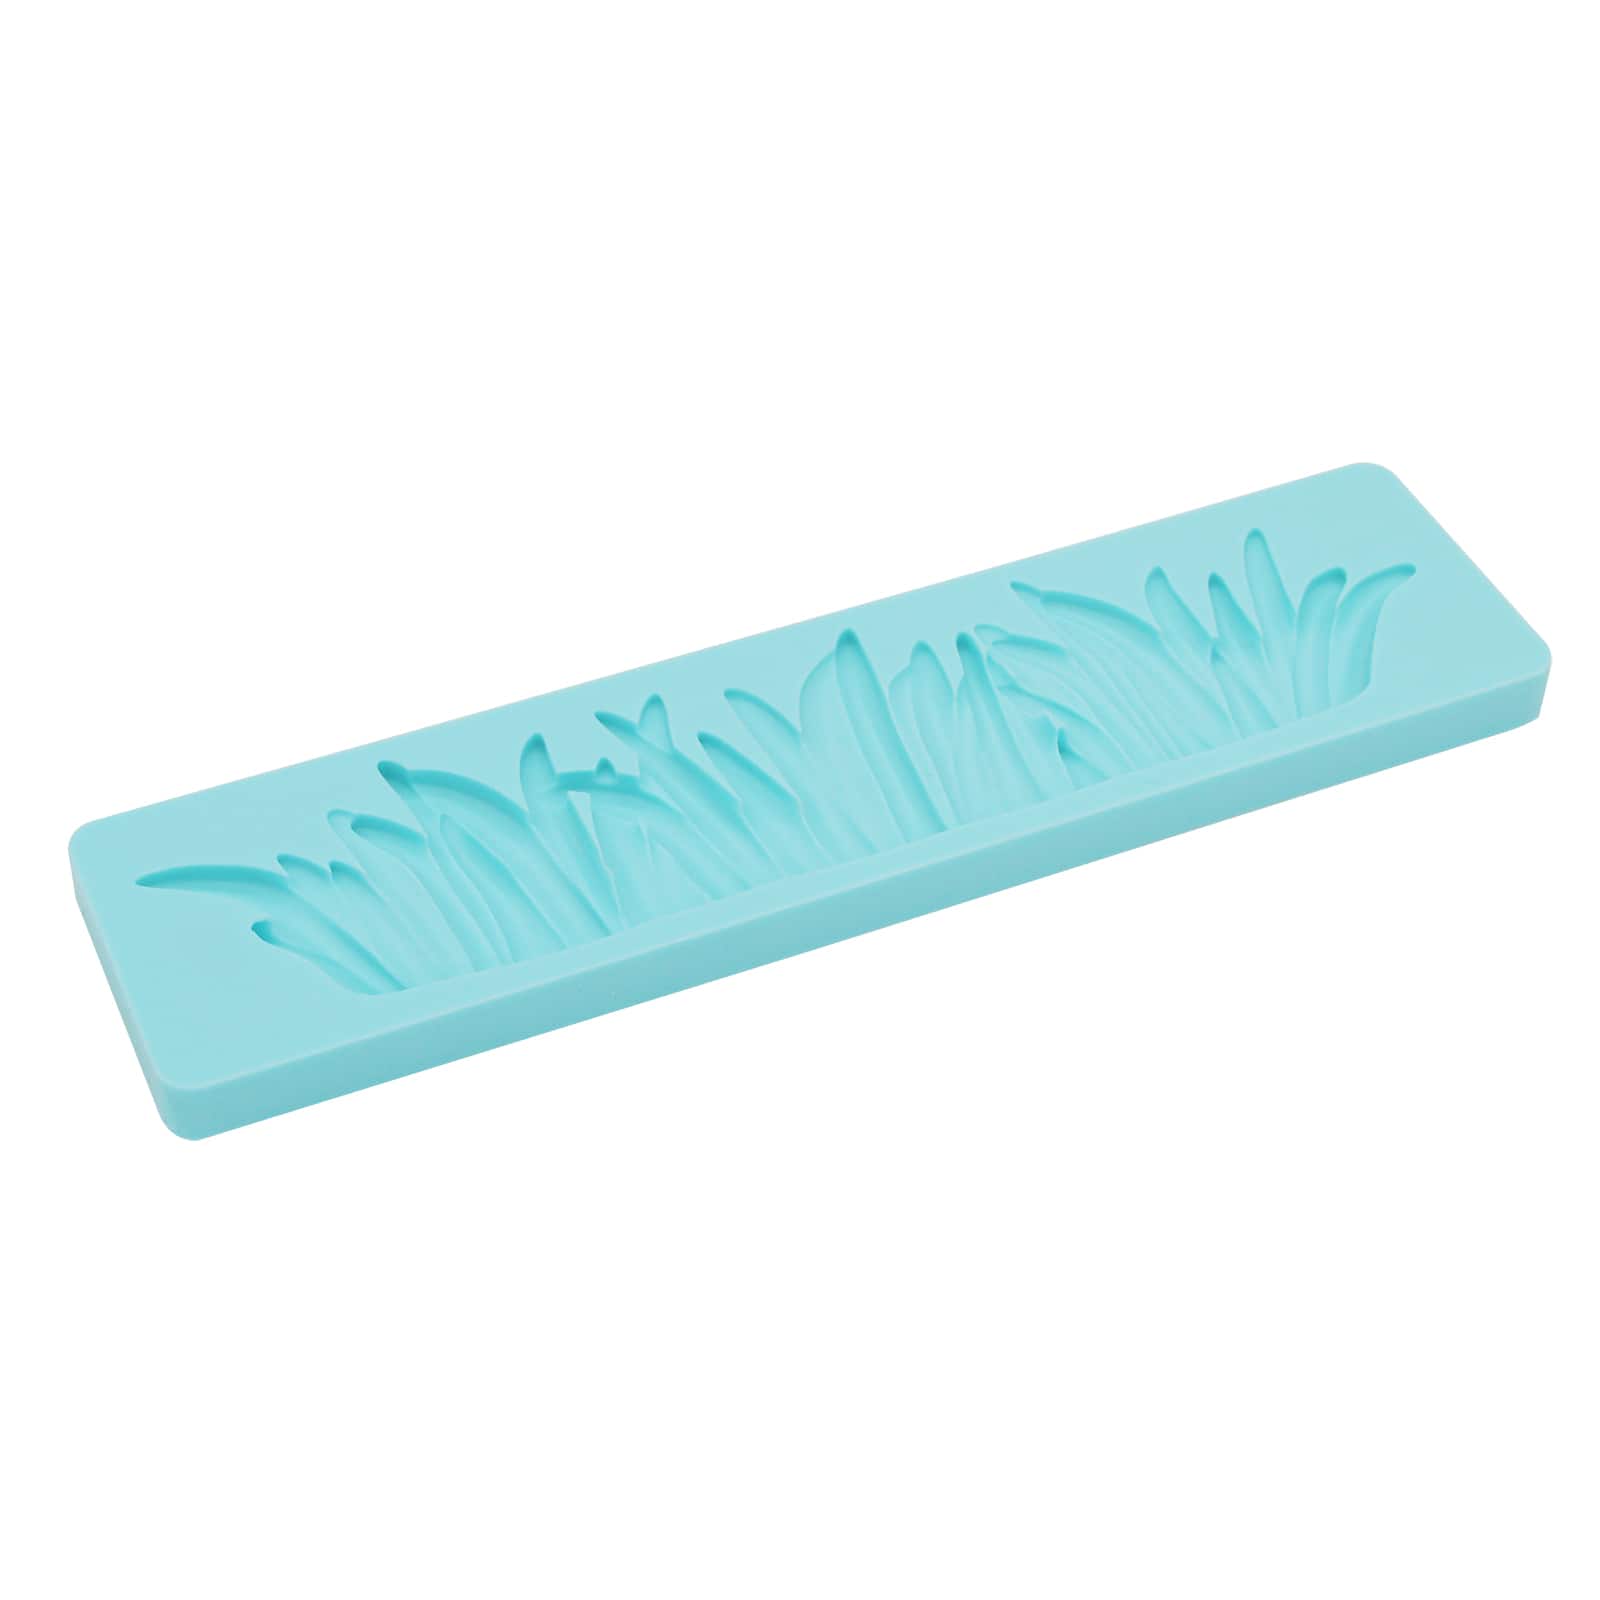 6 Pack: Grass Silicone Fondant Border Mold by Celebrate It&#xAE;